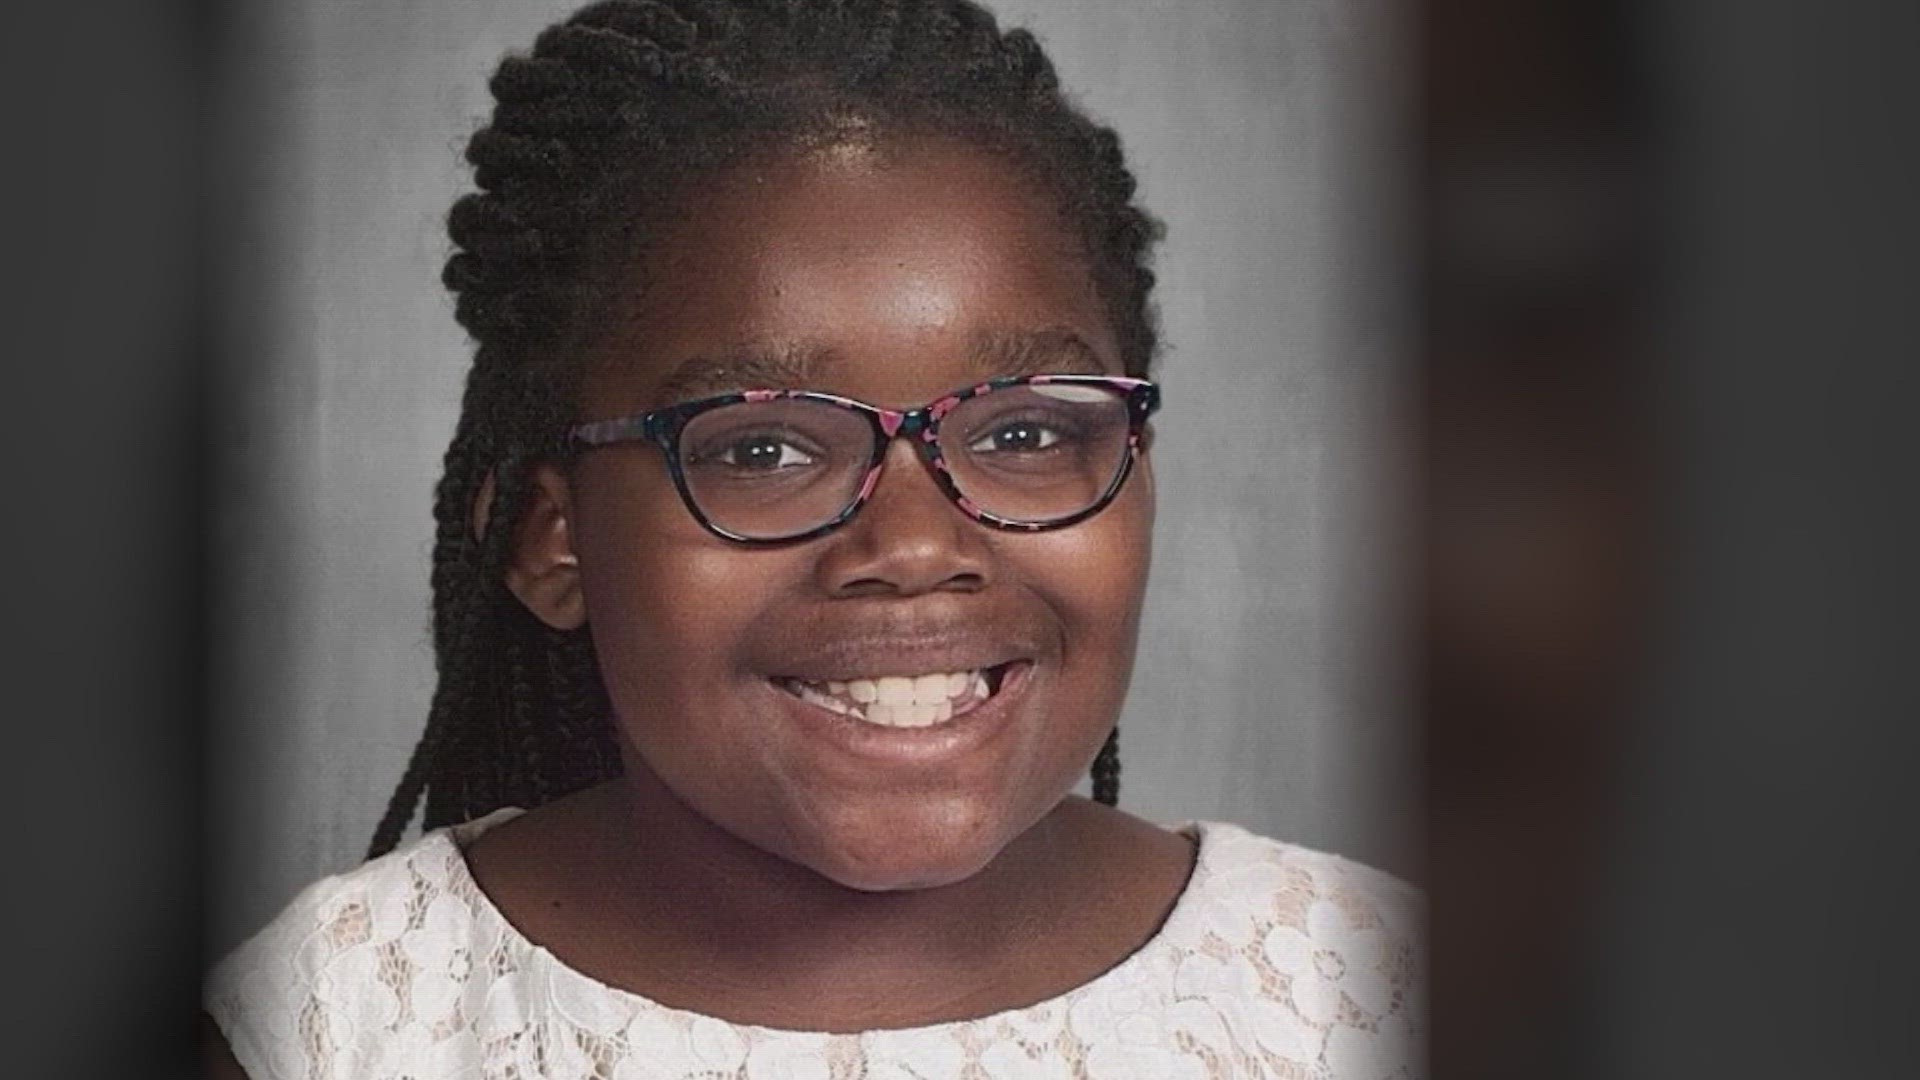 Police say investigators believe Arlington fifth-grader Liyah-Grace Holsey was attempting to cross a street when she was hit by two vehicles.